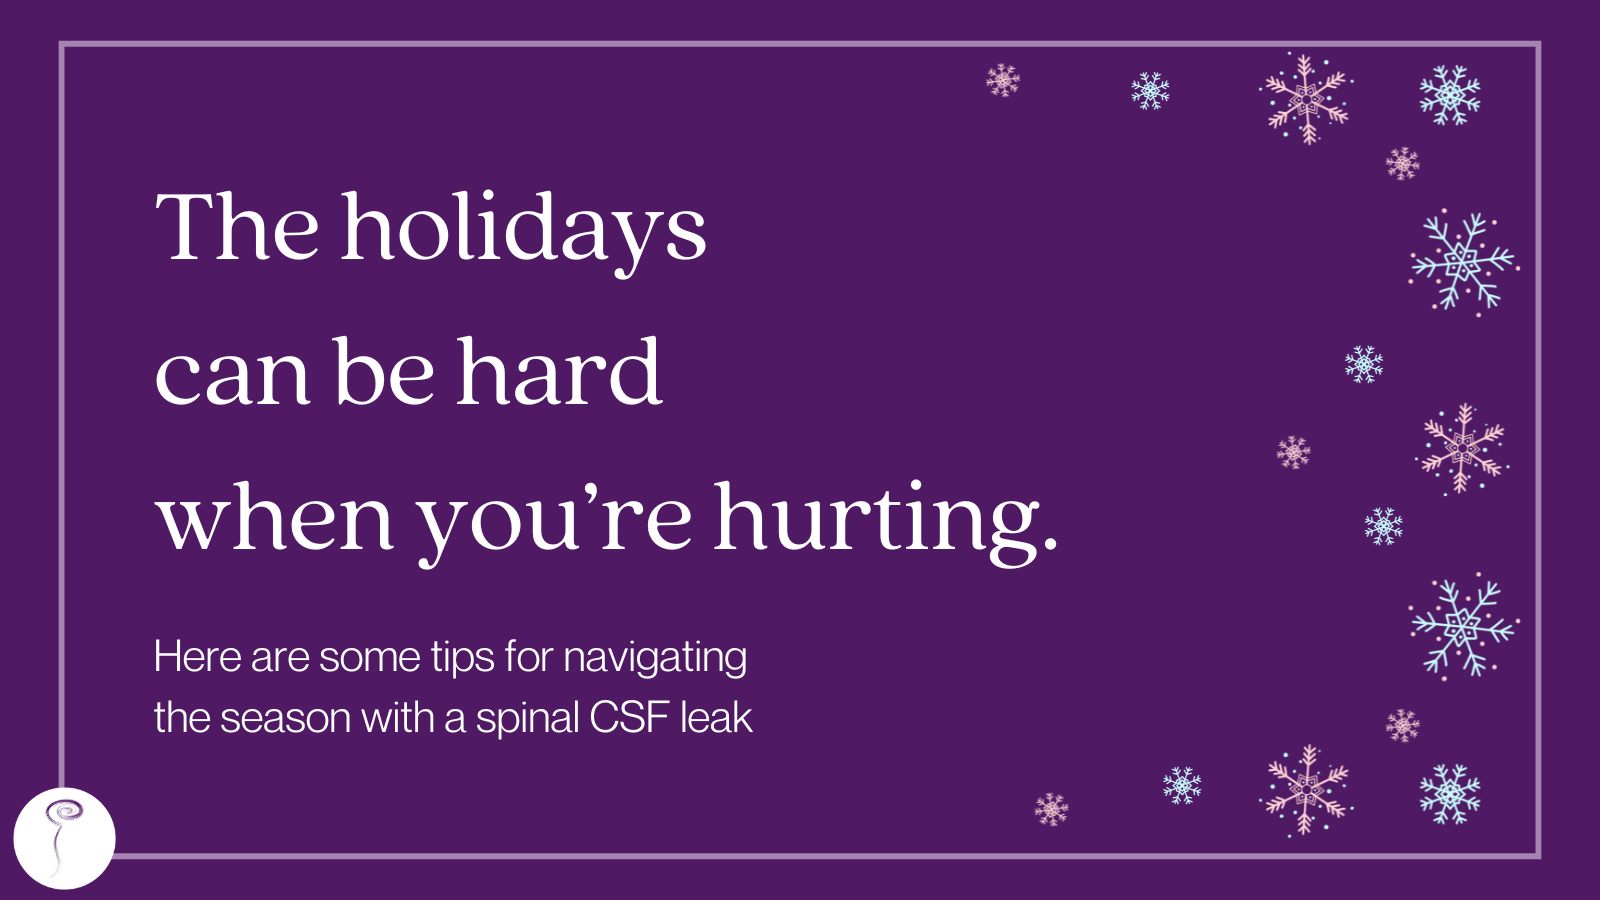 The holidays can be hard when you’re hurting